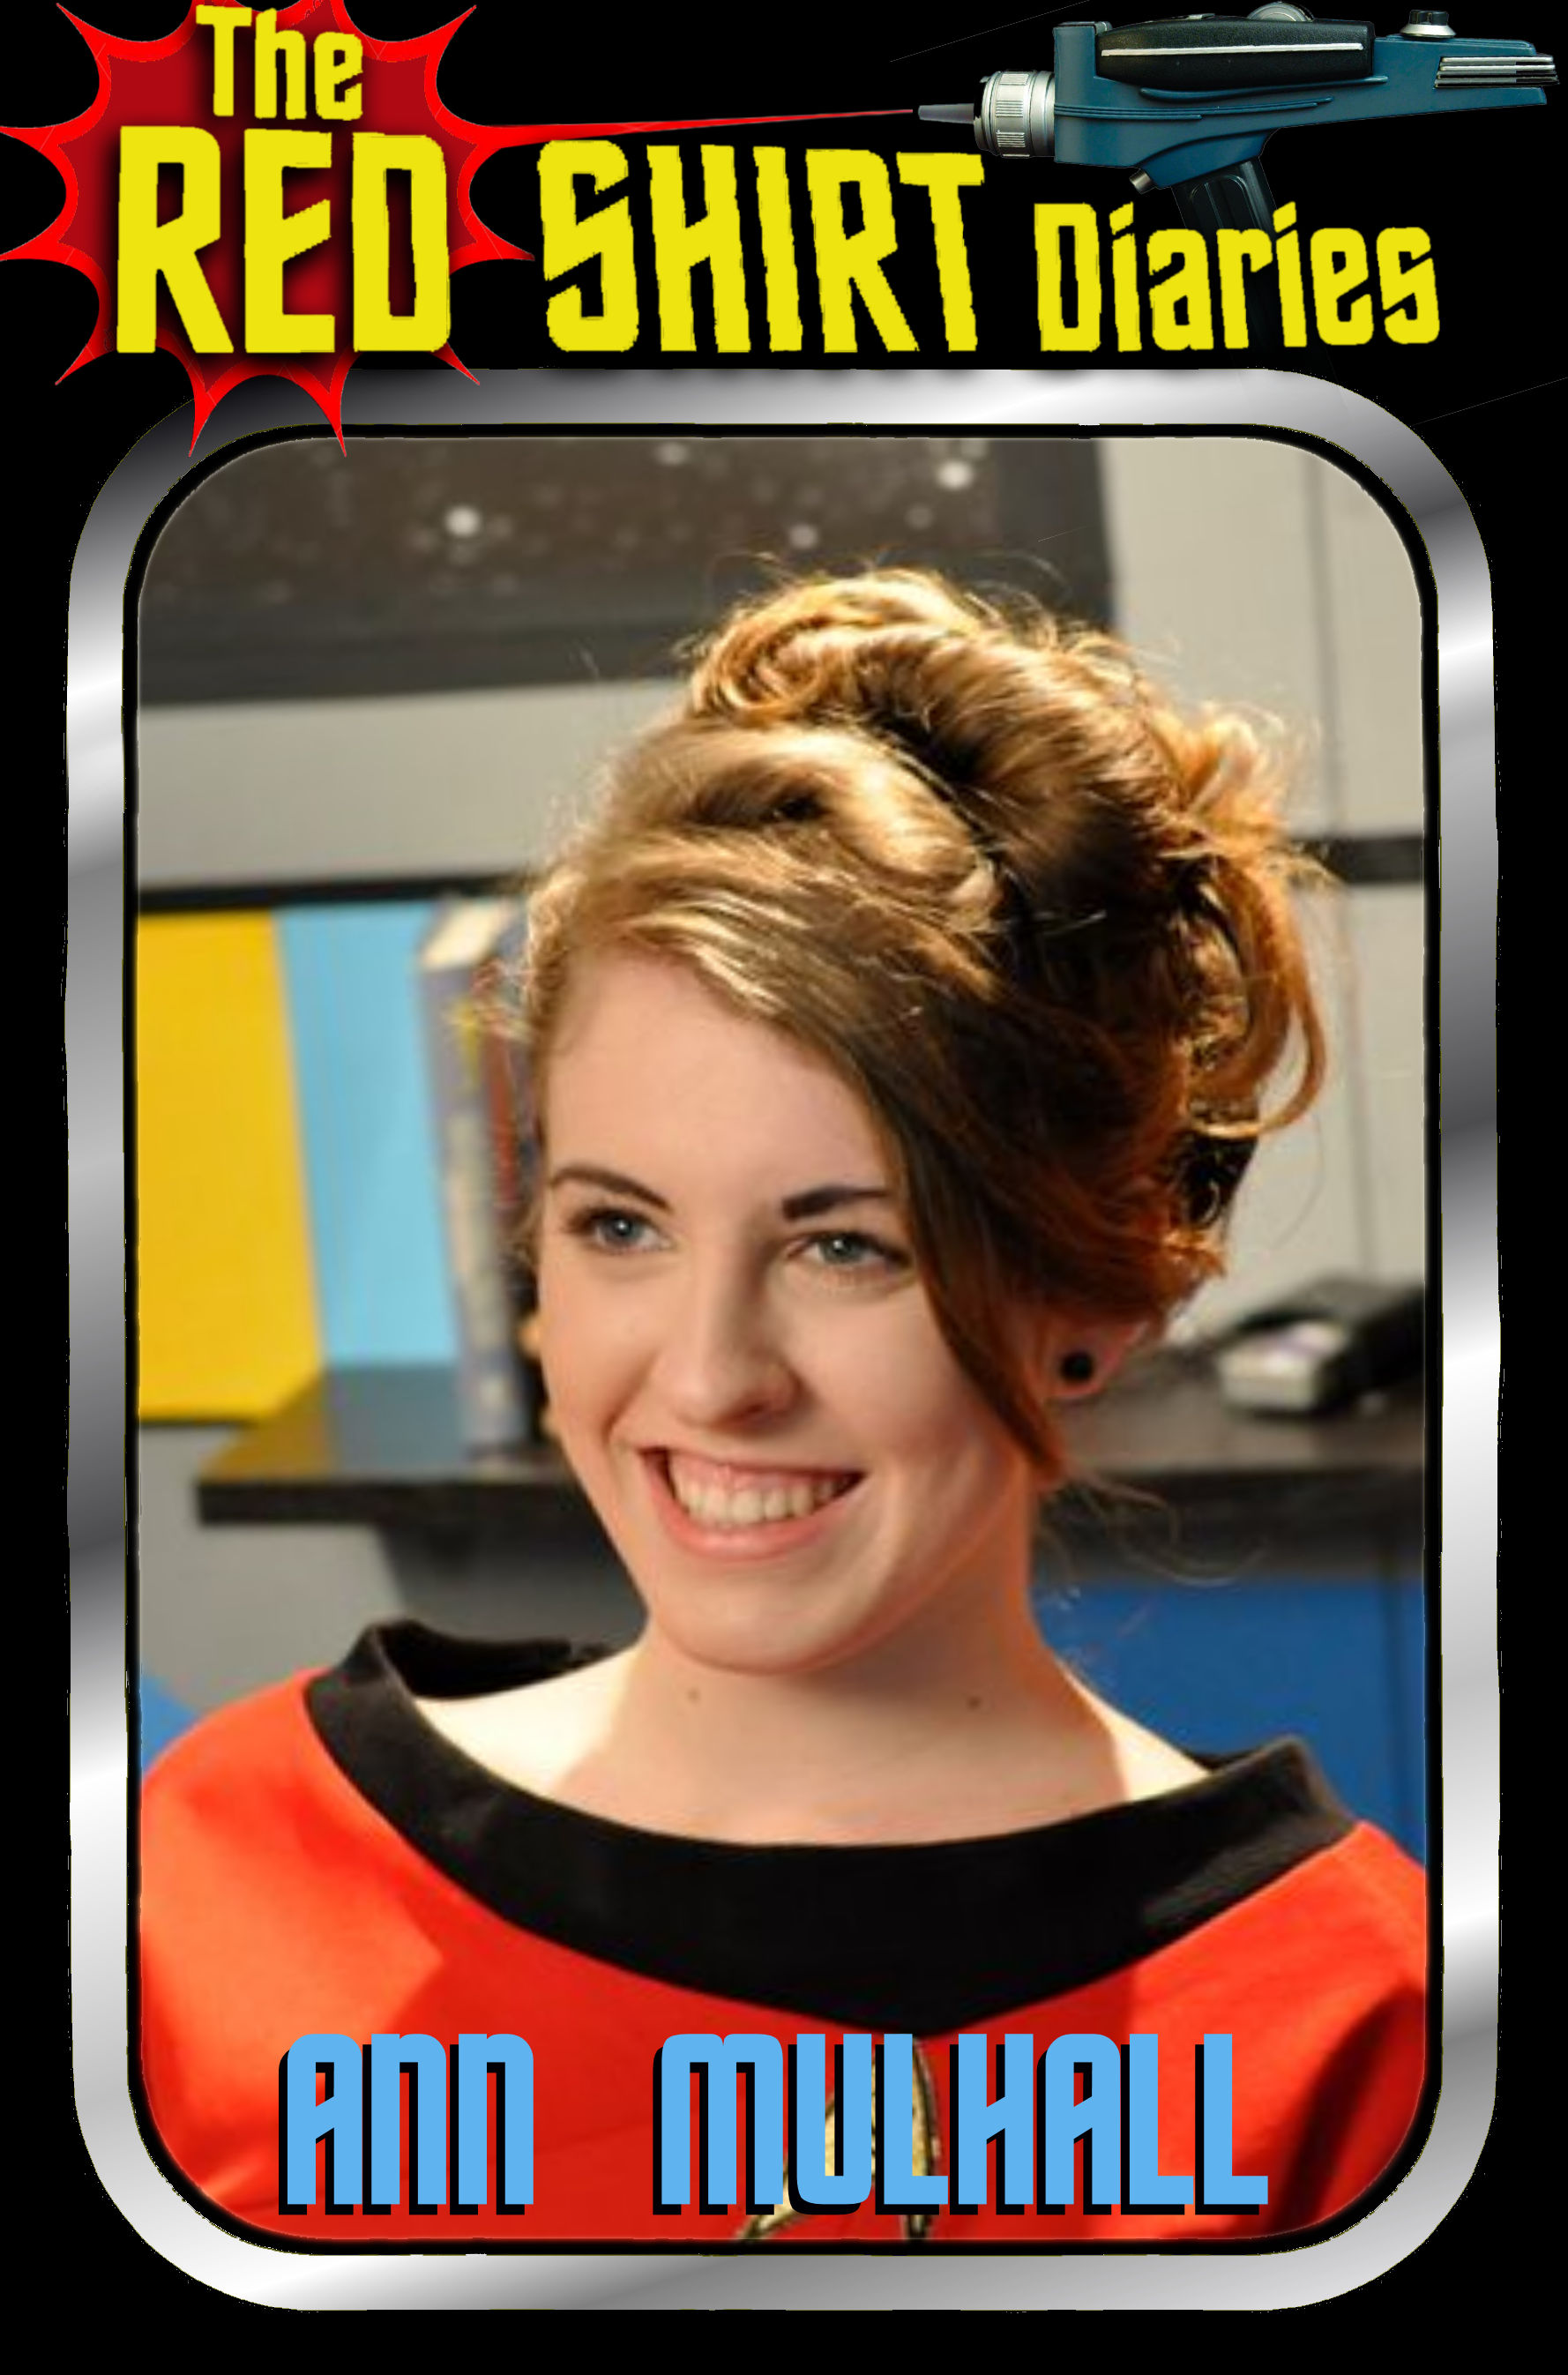 Emma Roberts as Ann Mulhall in The Red Shirt Diaries, Trading Card